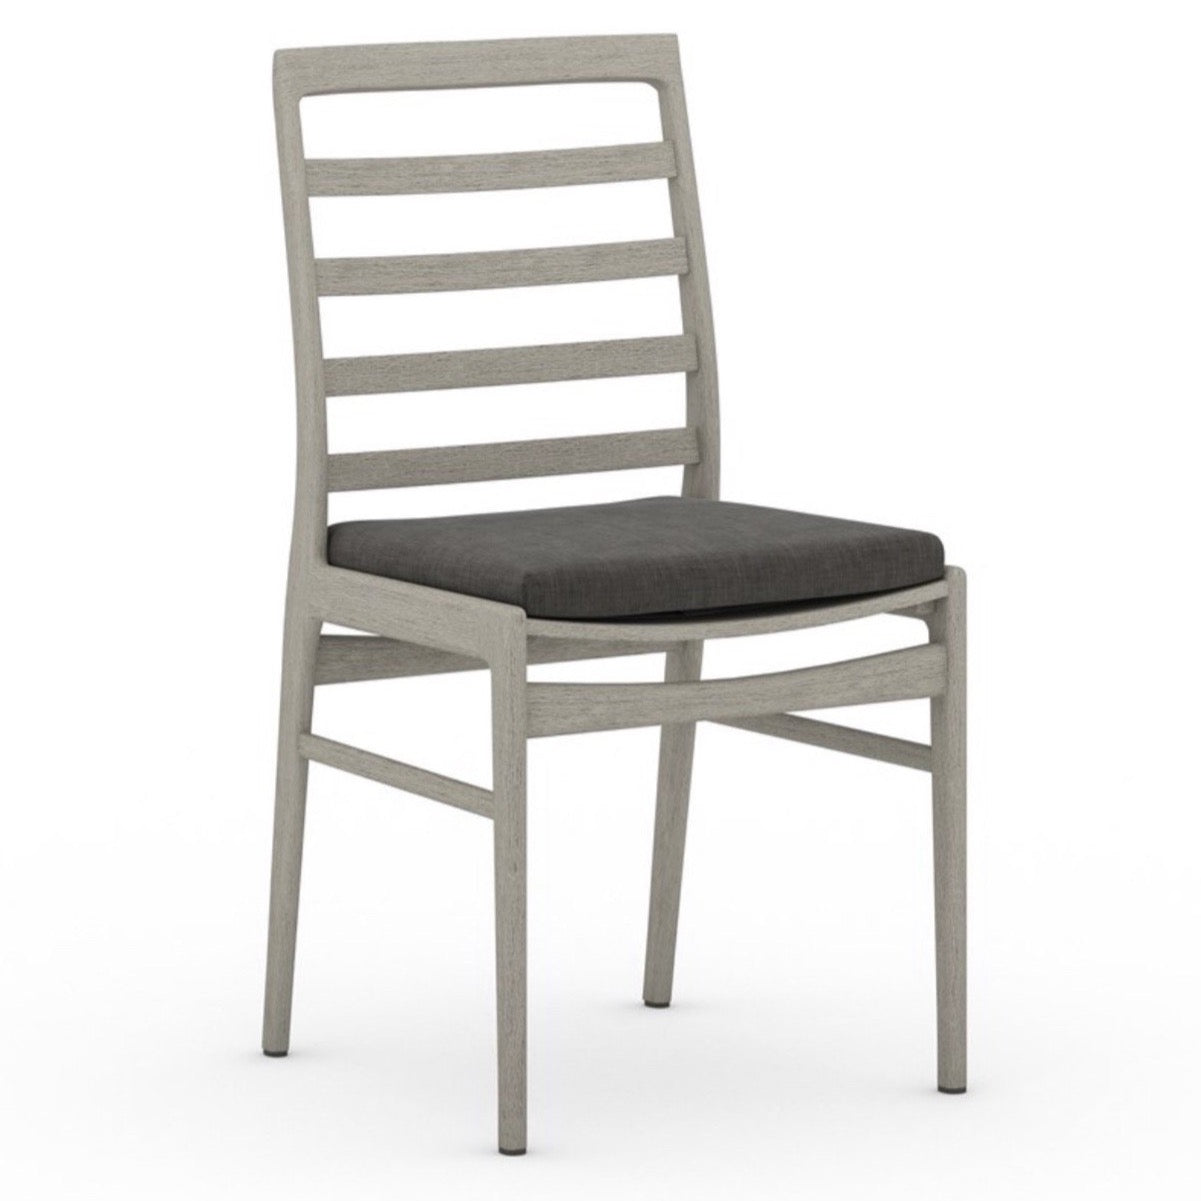 Linnet Outdoor Dining Chair-Grey/Charcoal